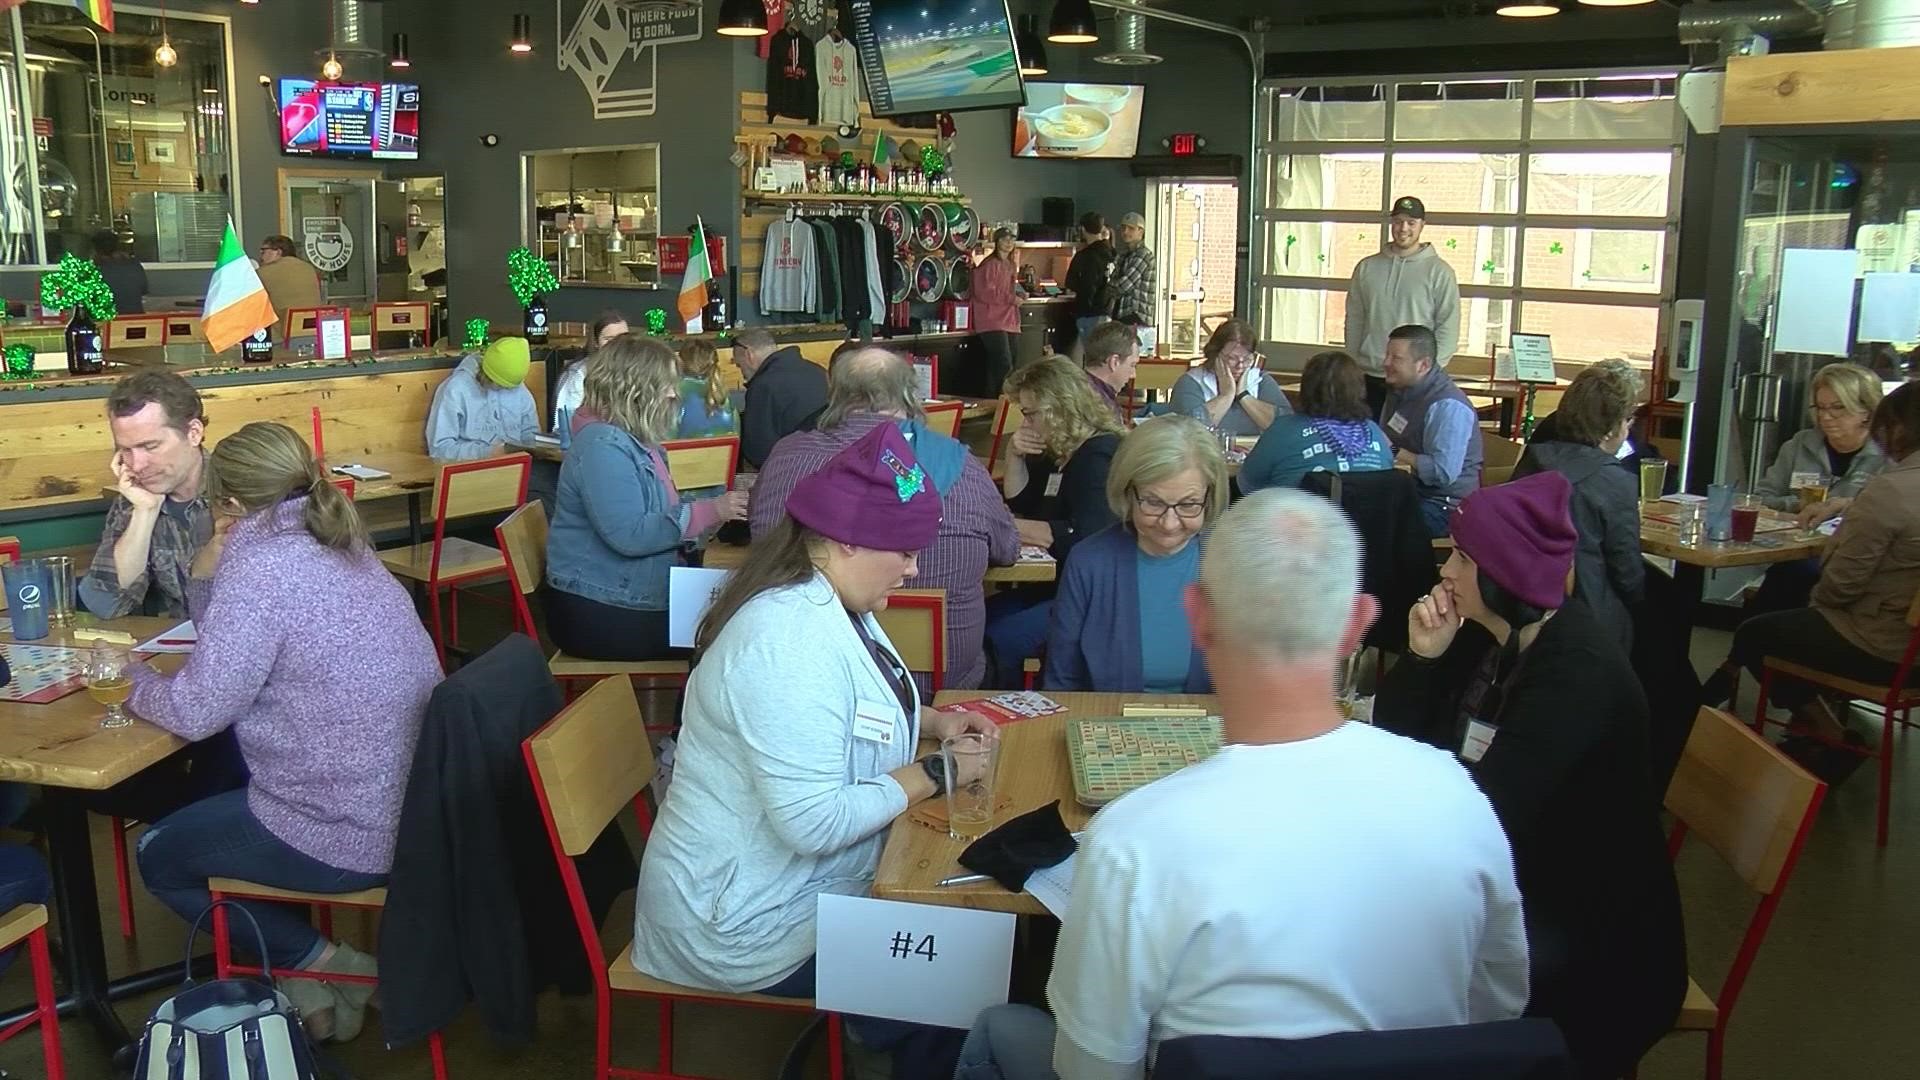 Dozens of Scrabble players got together at the Findlay Brewing Company on Sunday to drink beer and raise money for the Jerry Sisser Scholarship Fund.